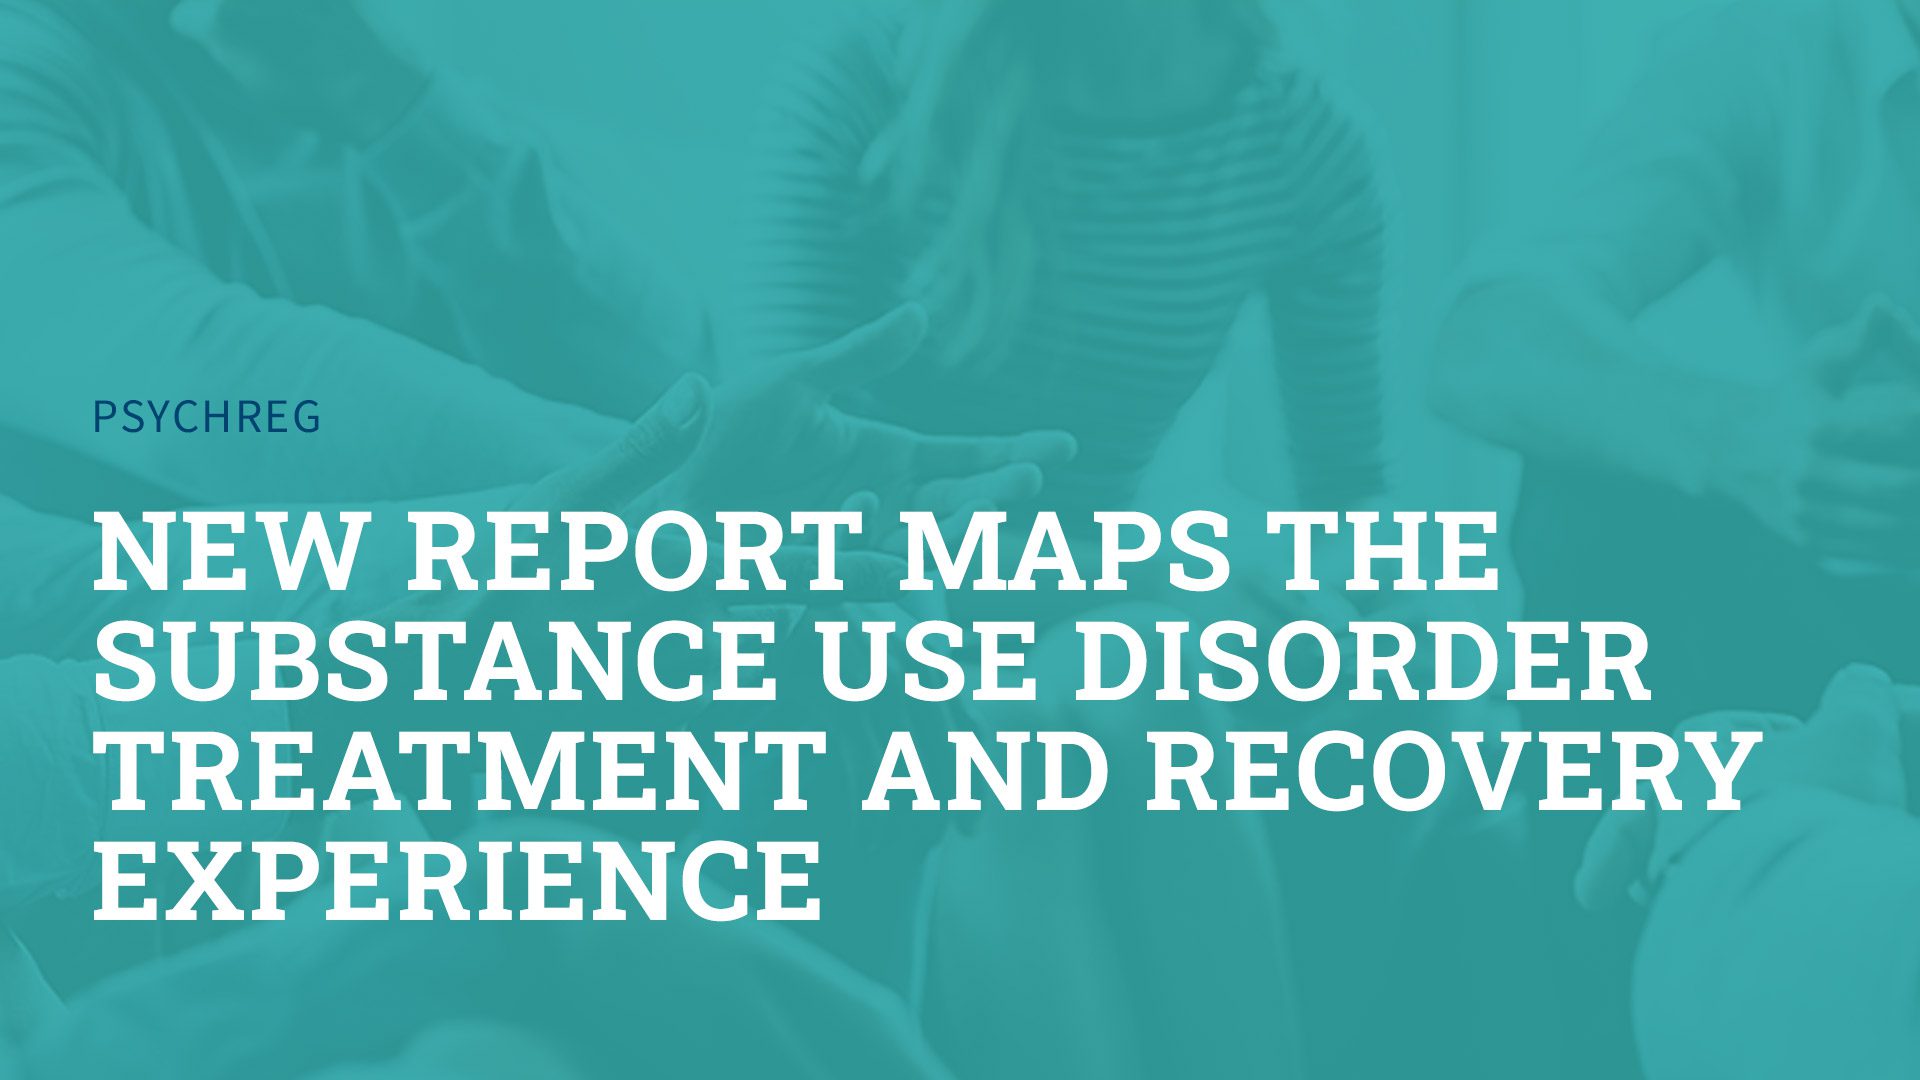 New Report Maps the Substance Use Disorder Treatment and Recovery Experience